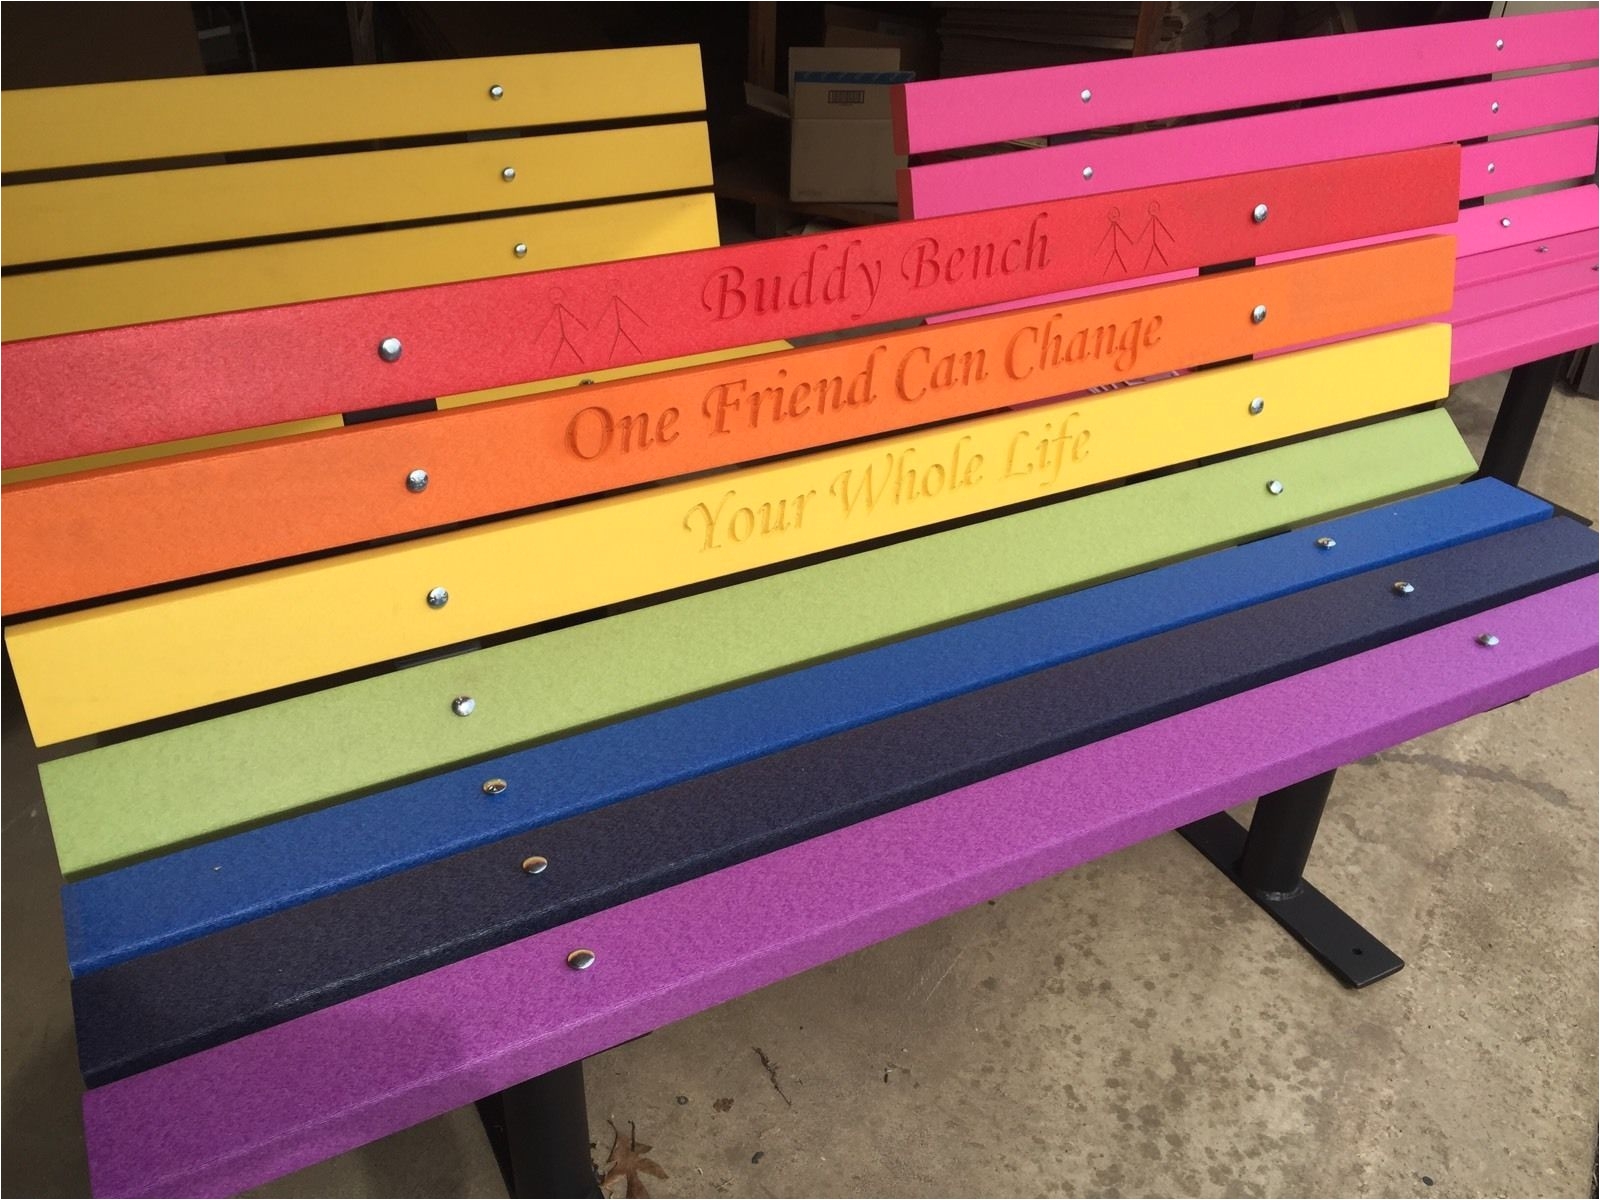 buddy bench rainbow vibrant colors recycled plastic lumber solid